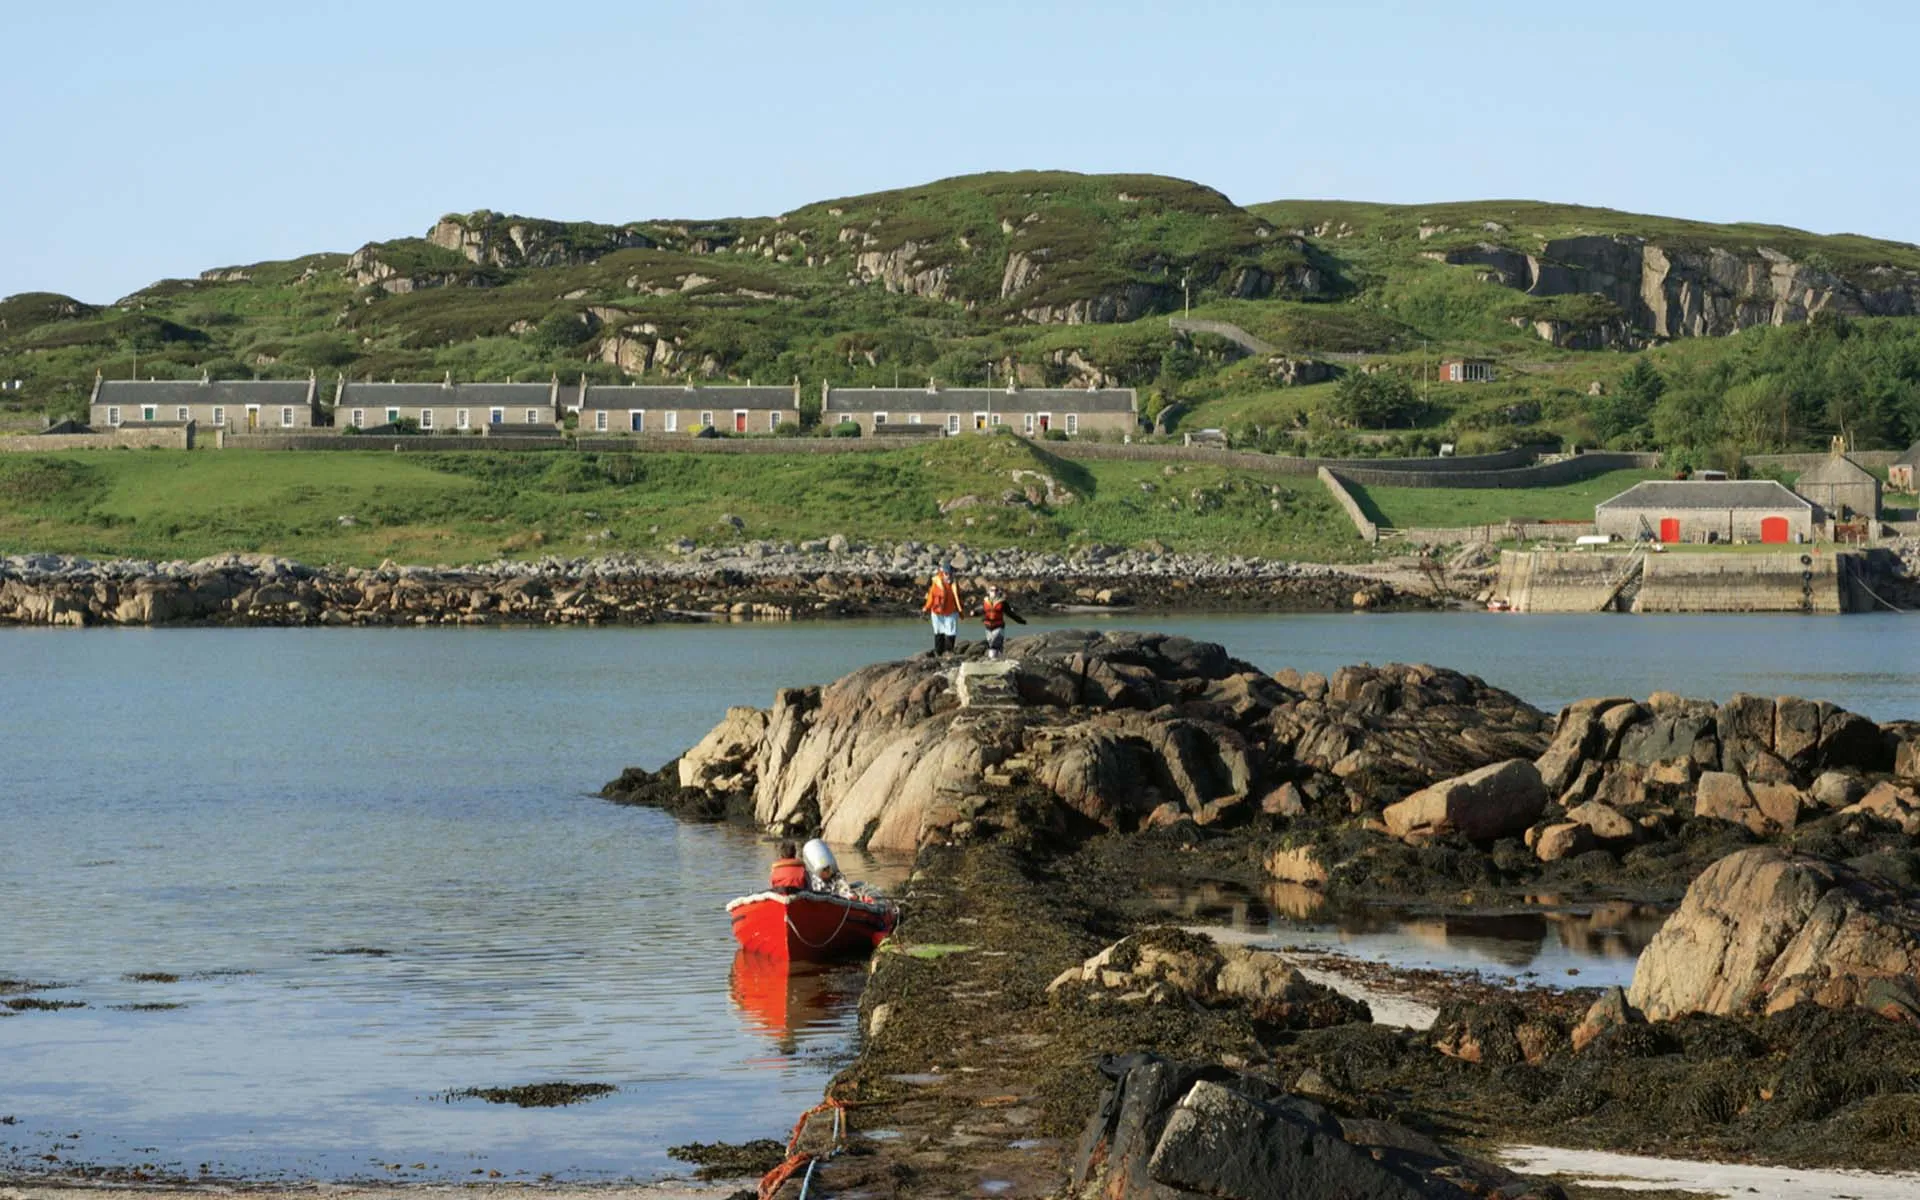 View across the water of the houses on the Isle of Erraid, rocks and seaweed in the foreground